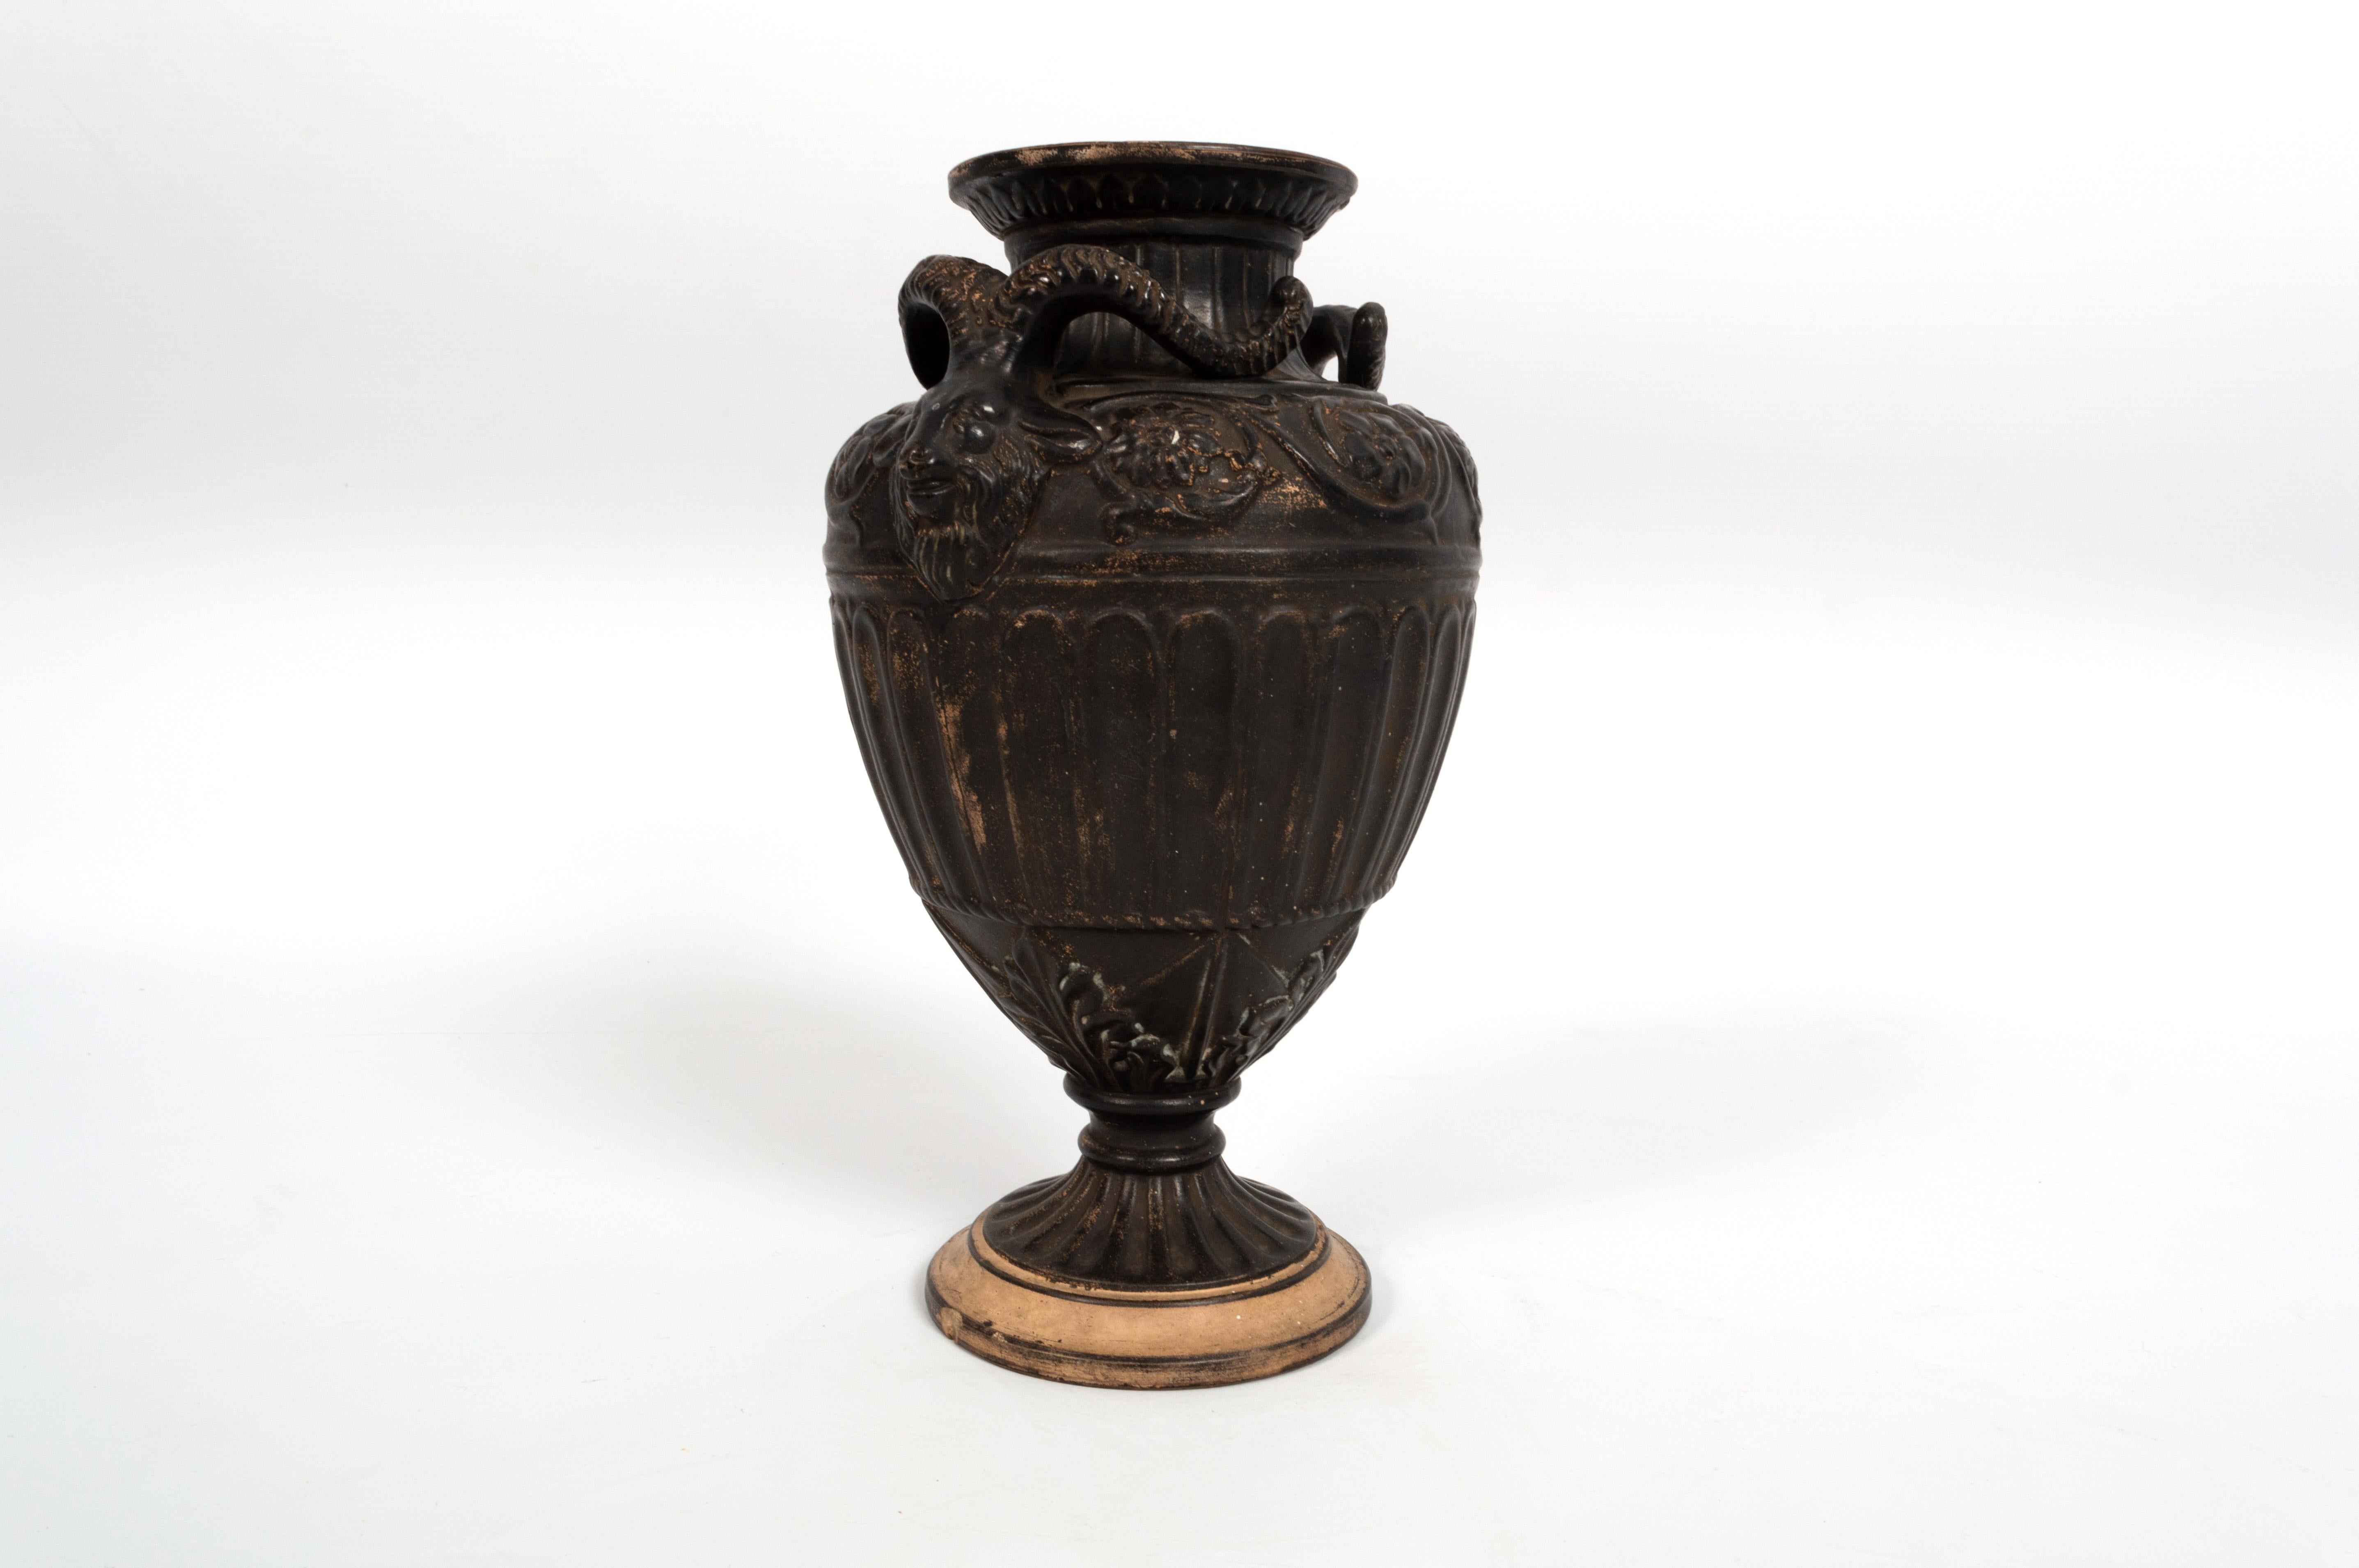 Earthenware Antique 19th Century Neoclassical Vase By Gerbing & Stephan, Germany, 1892 For Sale